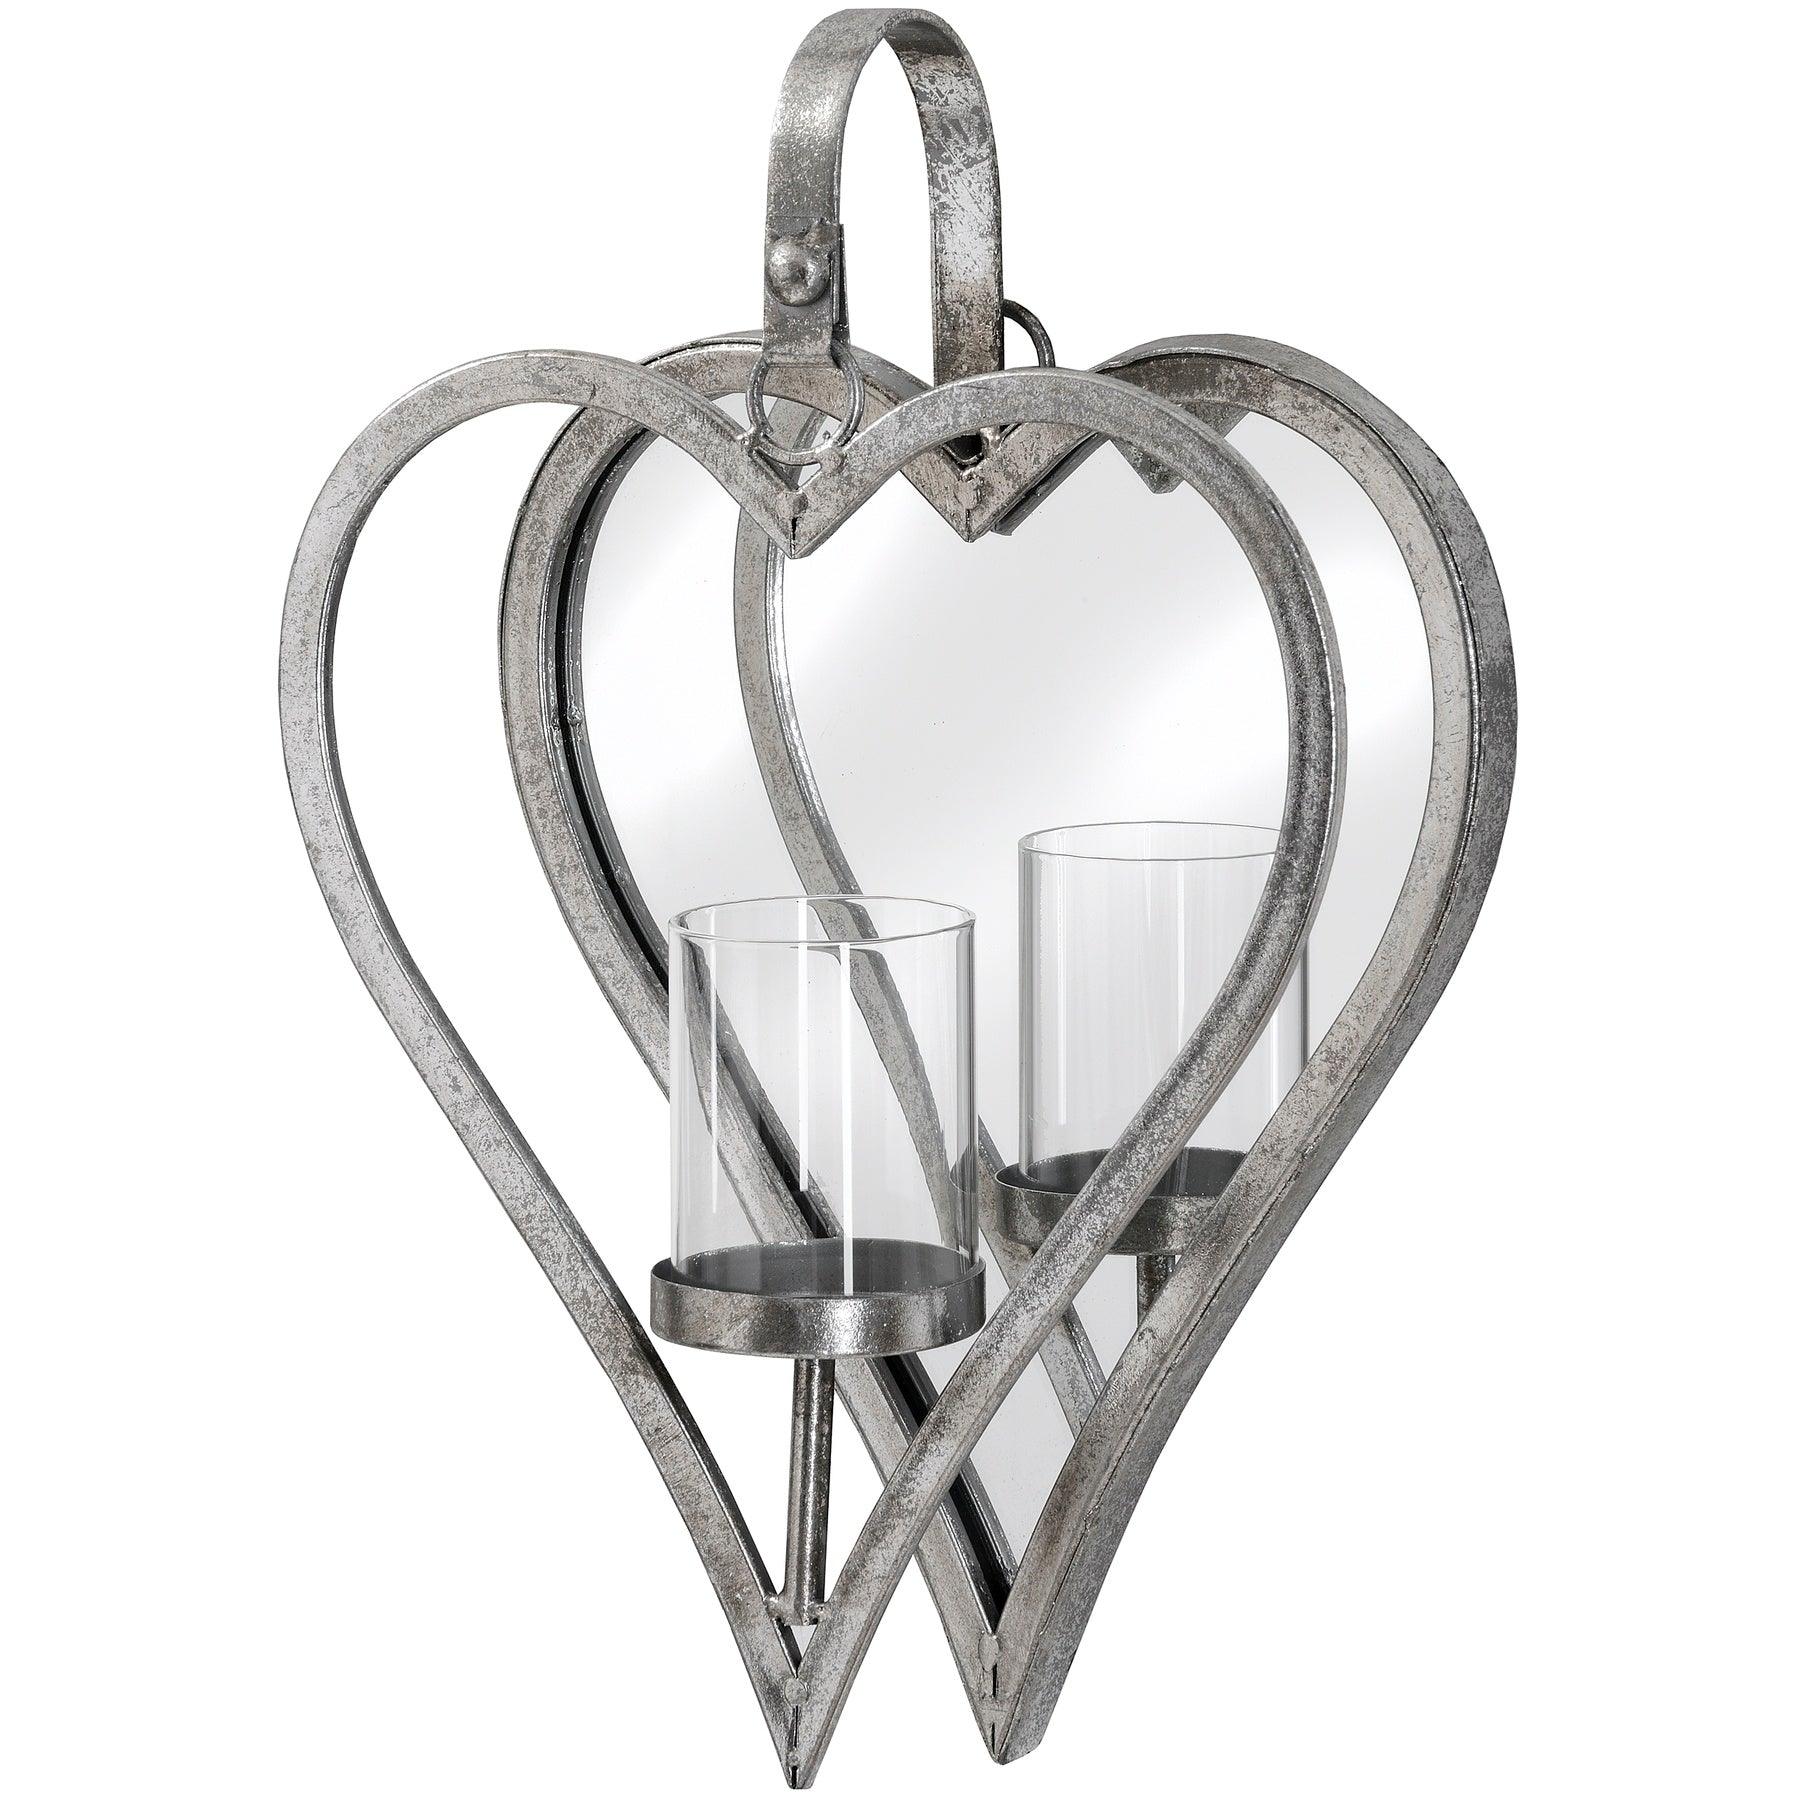 View Small Antique Silver Mirrored Heart Candle Holder information